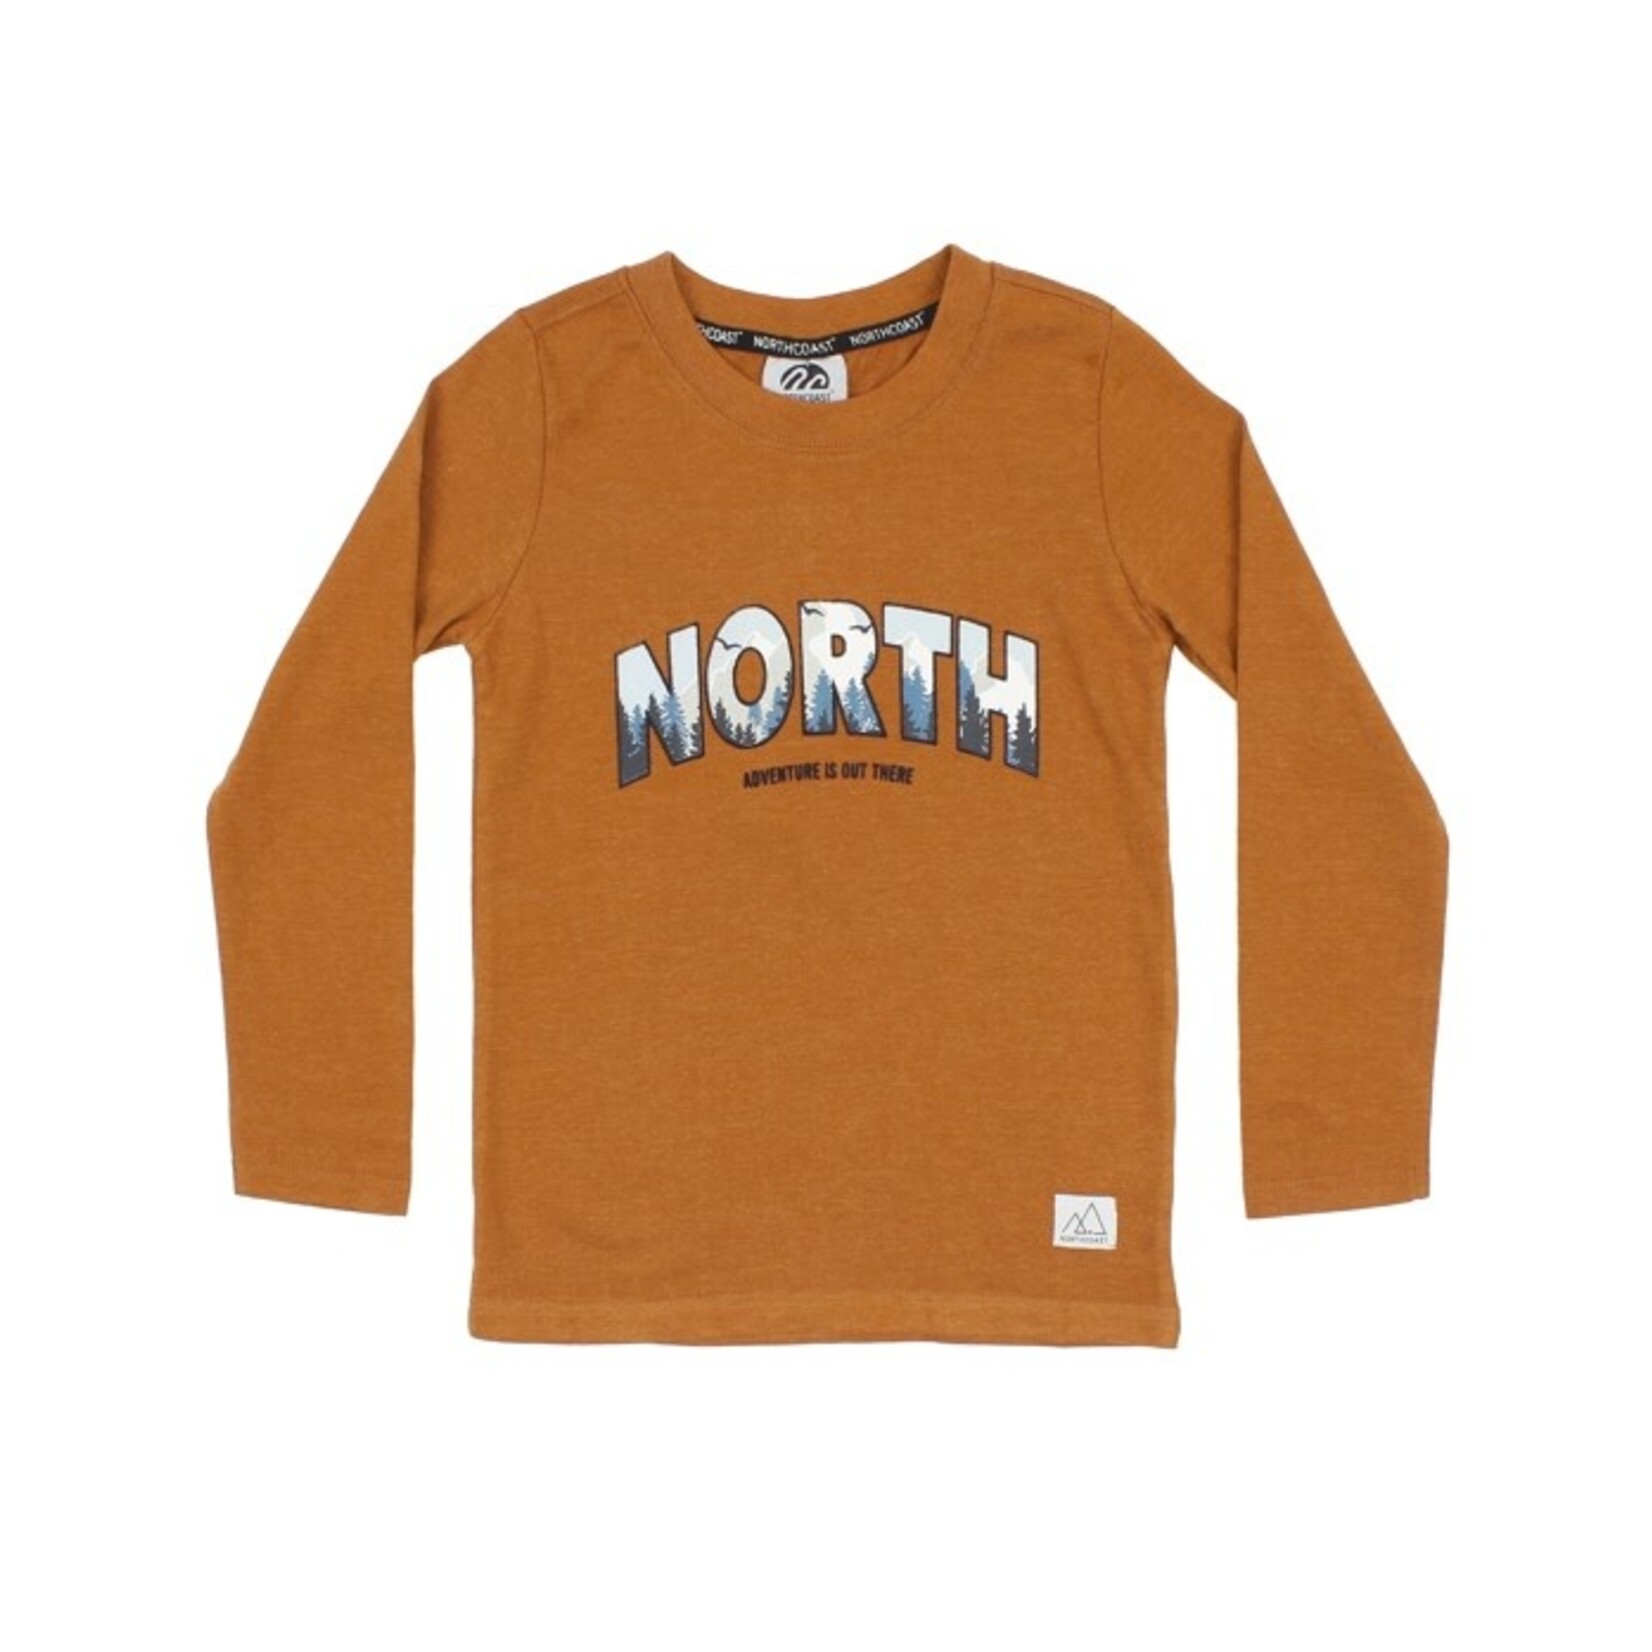 Northcoast NORTHCOAST - Long sleeve caramel-coloured t-shirt with North print 'Advendure is out there'